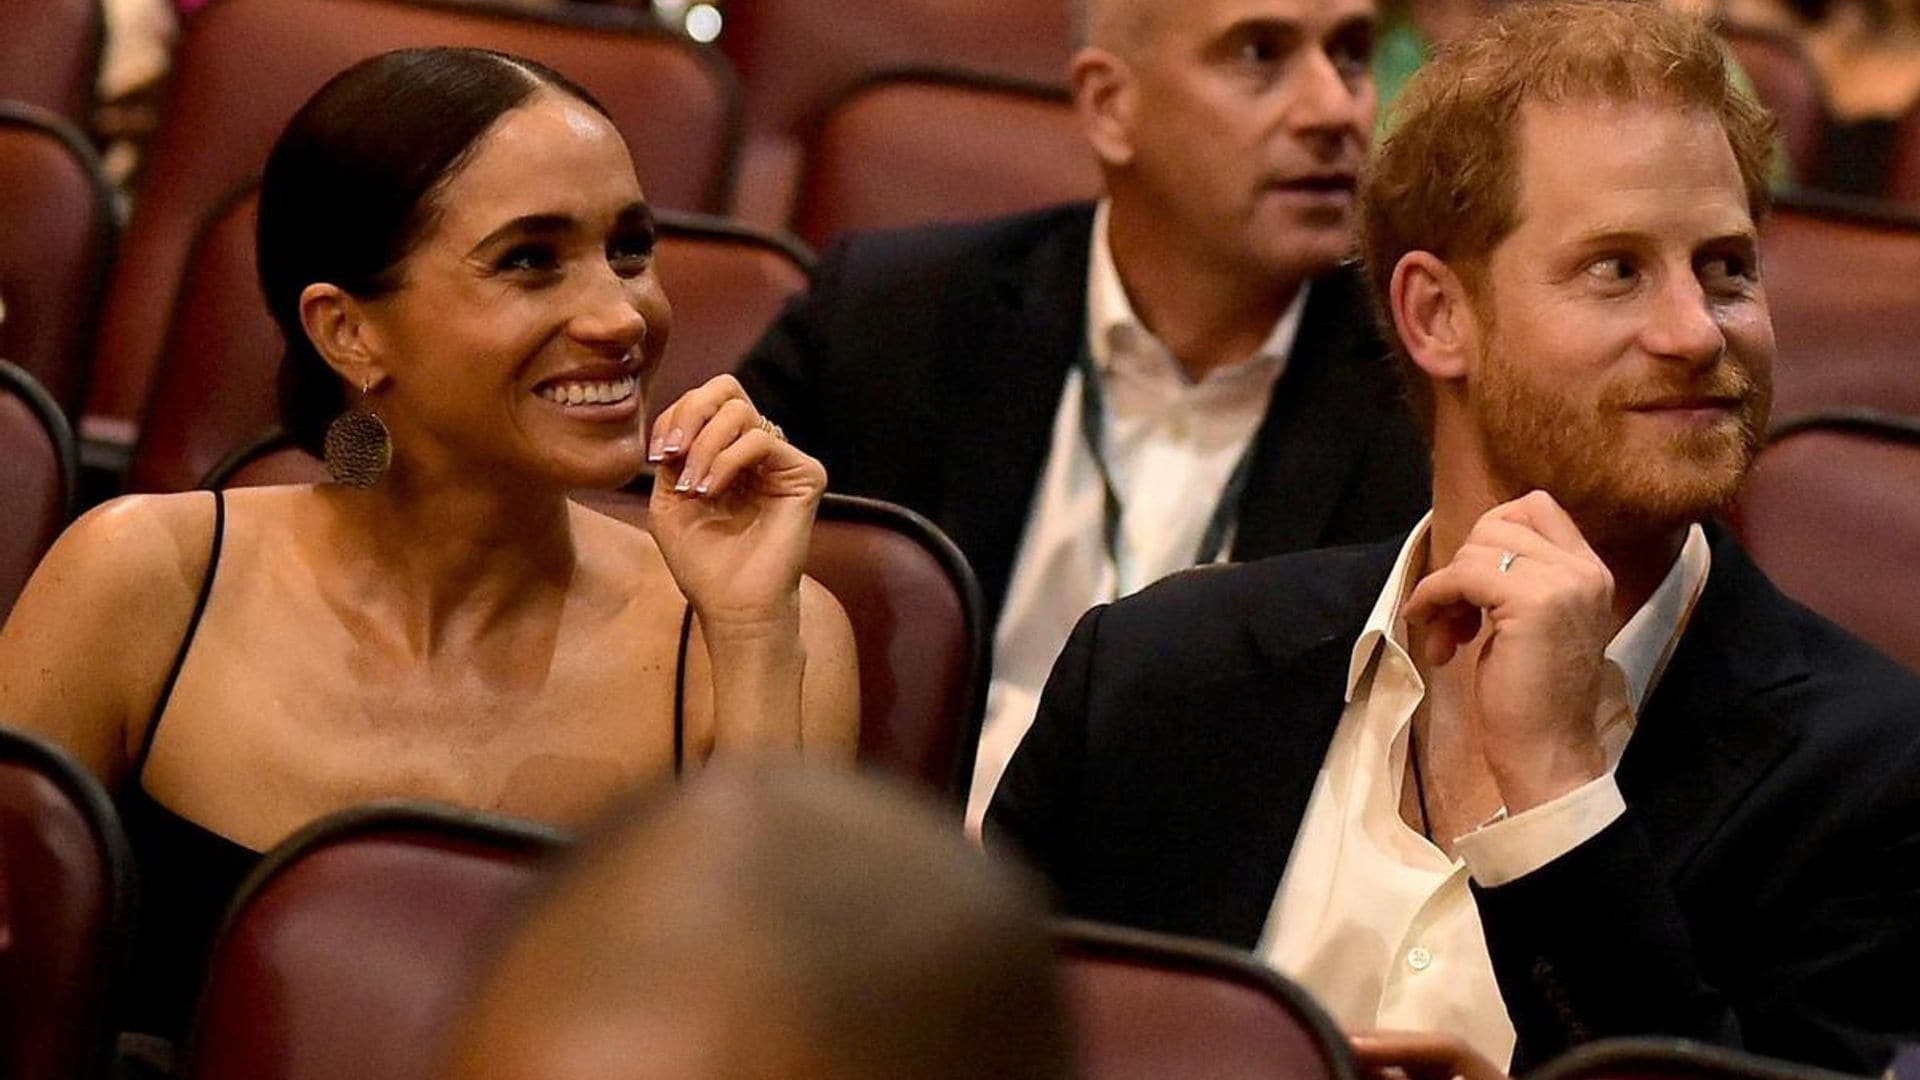 Meghan Markle and Prince Harry have red carpet date night in Jamaica